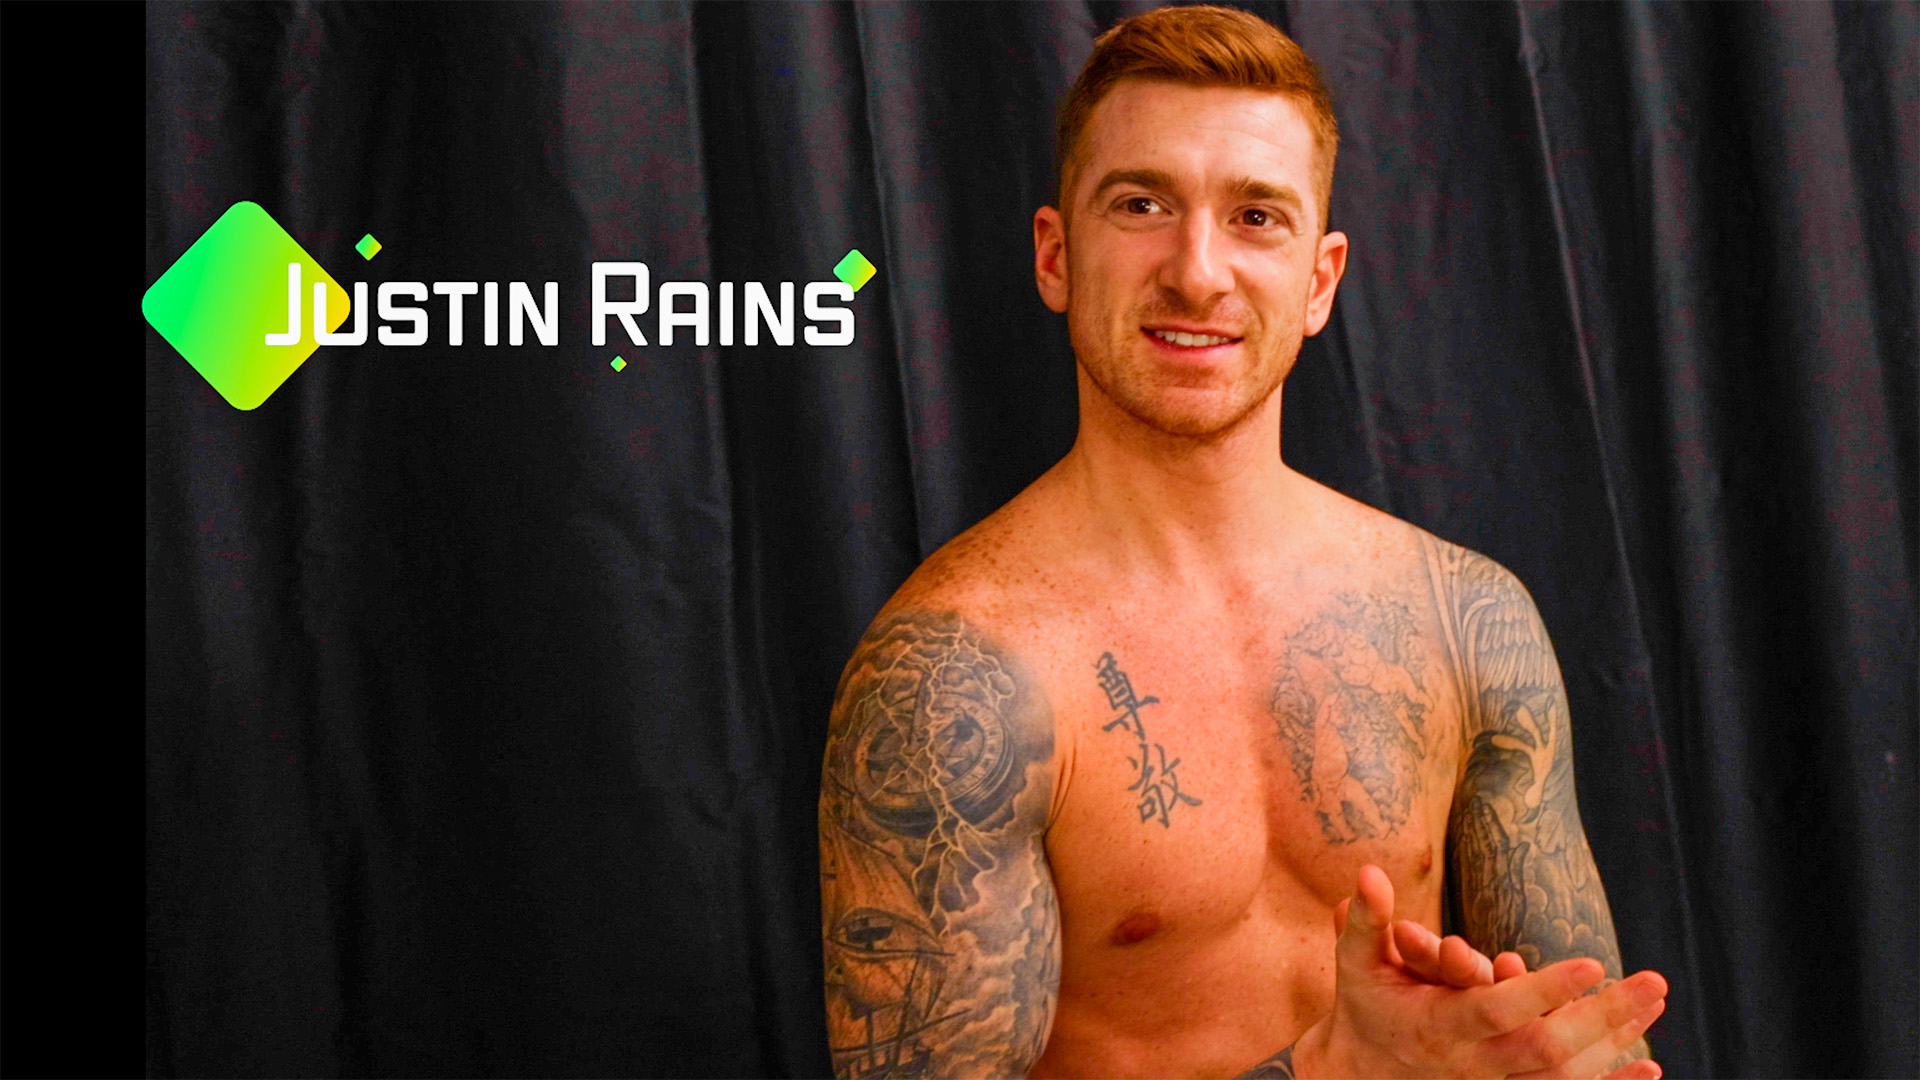 Interview: Hot Redhead Justin Rains Breaks The Ice!